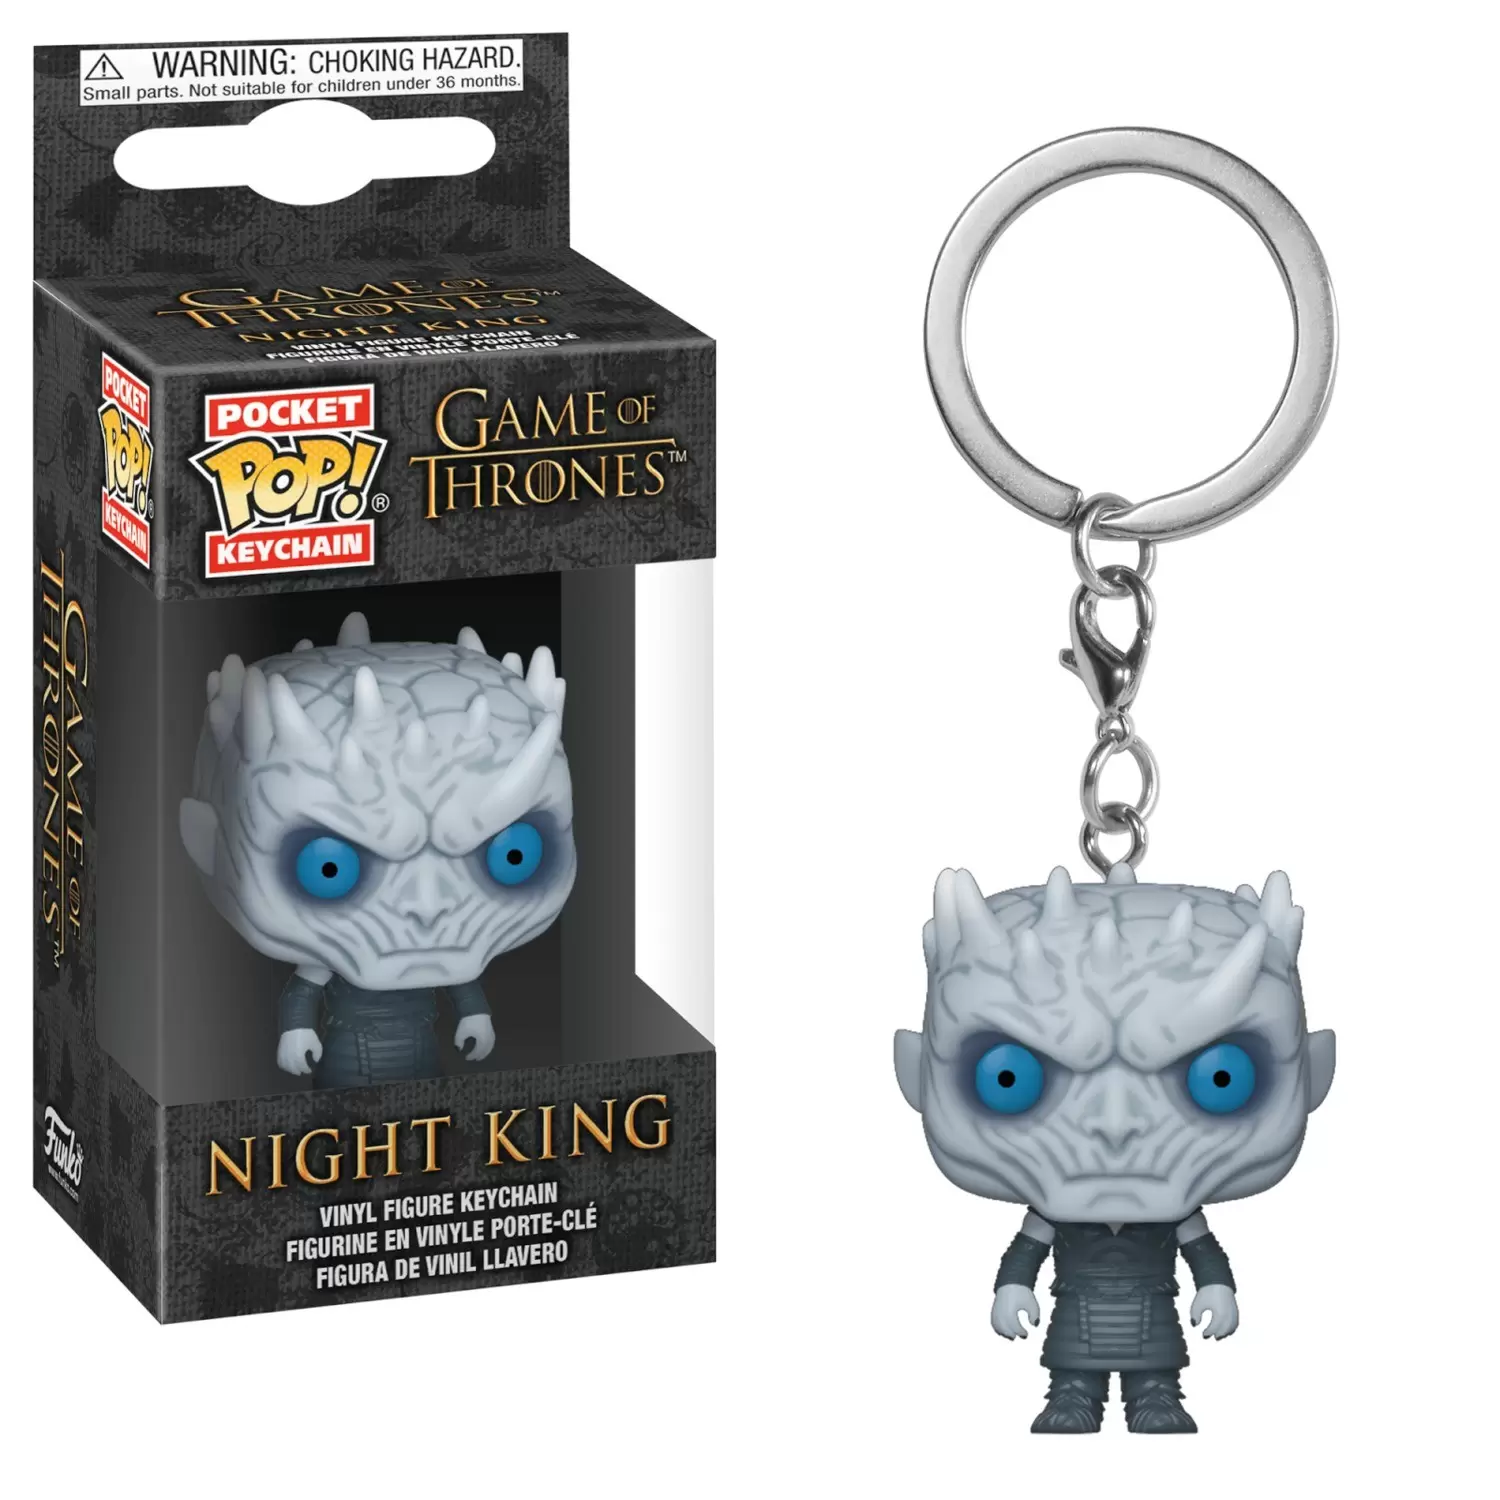 Game Of Thrones - POP! Keychain - Game of Thrones - Night King